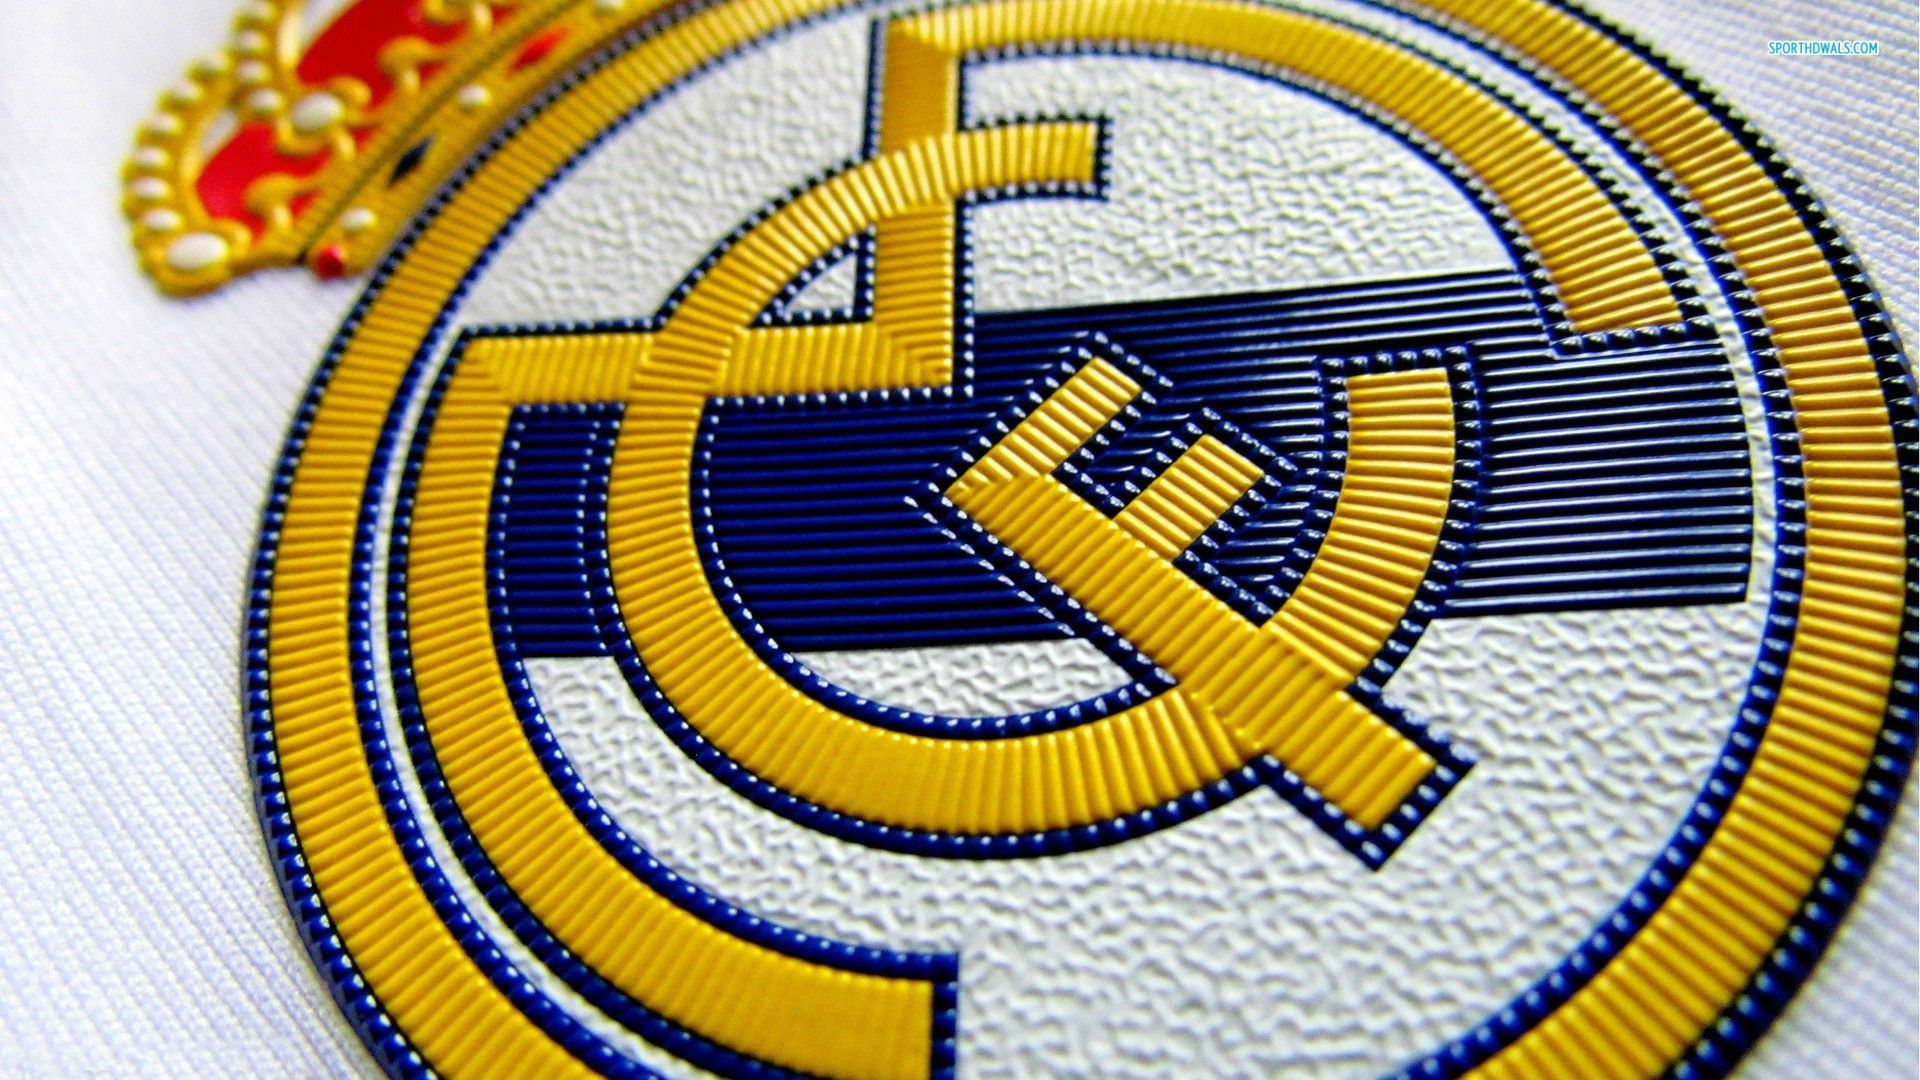 150+ Real Madrid . HD Wallpapers and Backgrounds